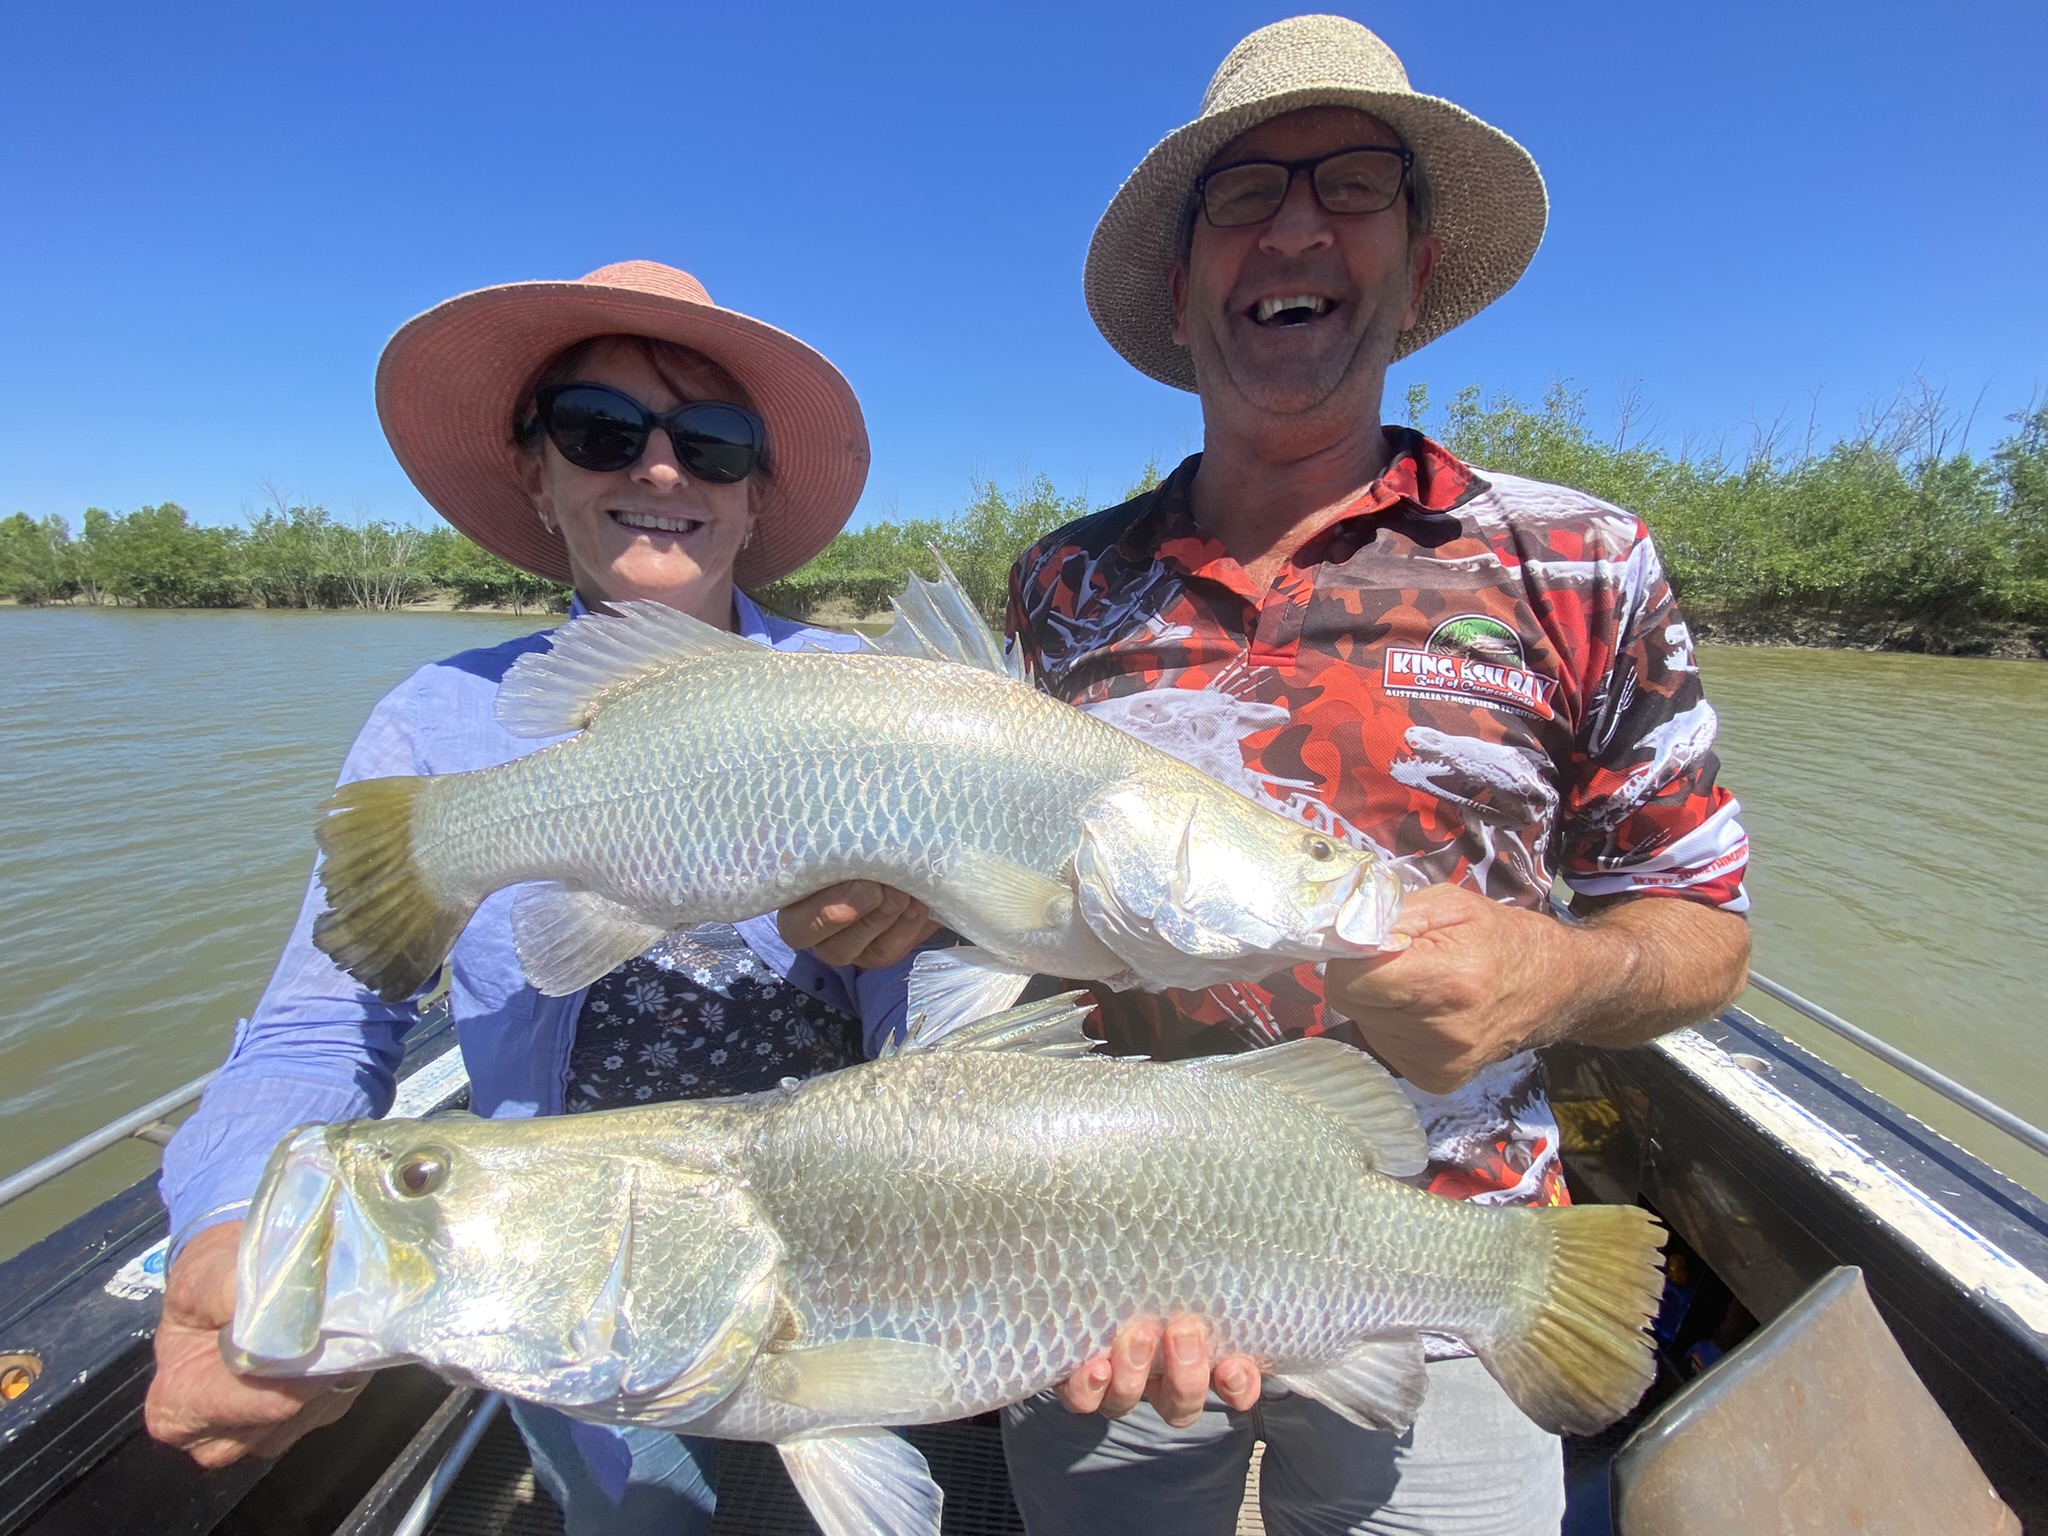 Register now to catch Australia’s Most Wanted fish!